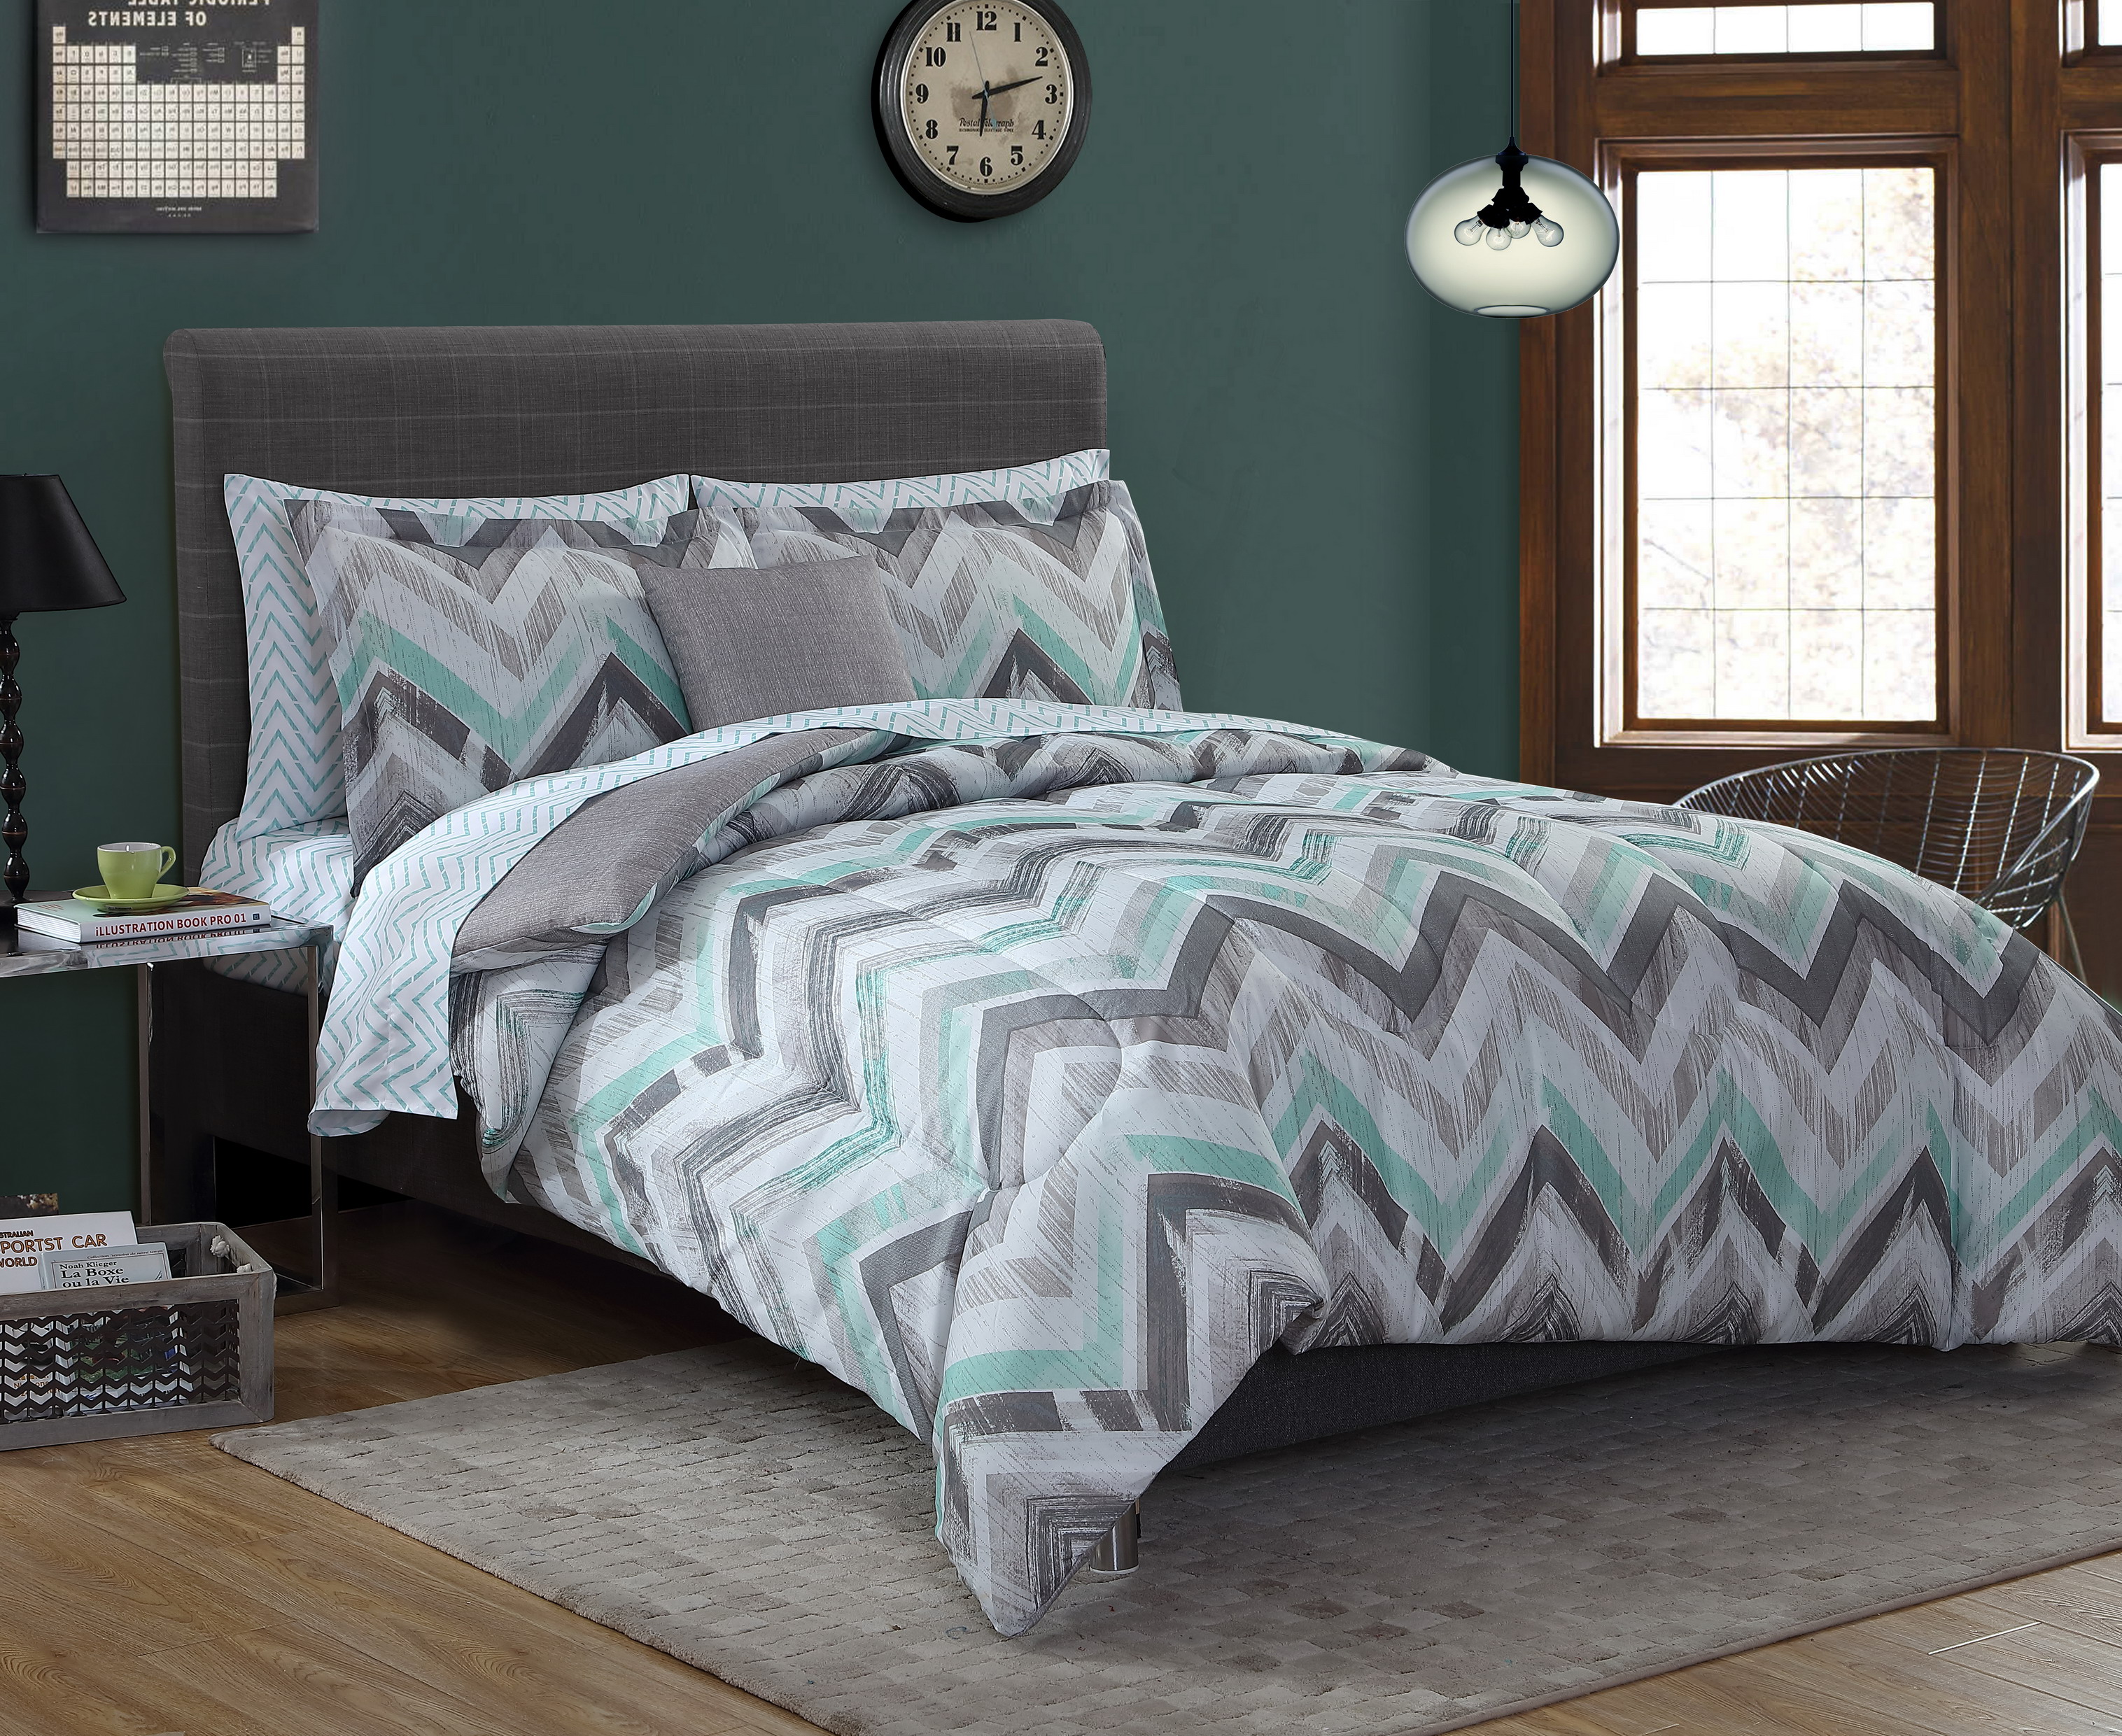 Essential Home Complete Bed Set Chevron Gray Mint